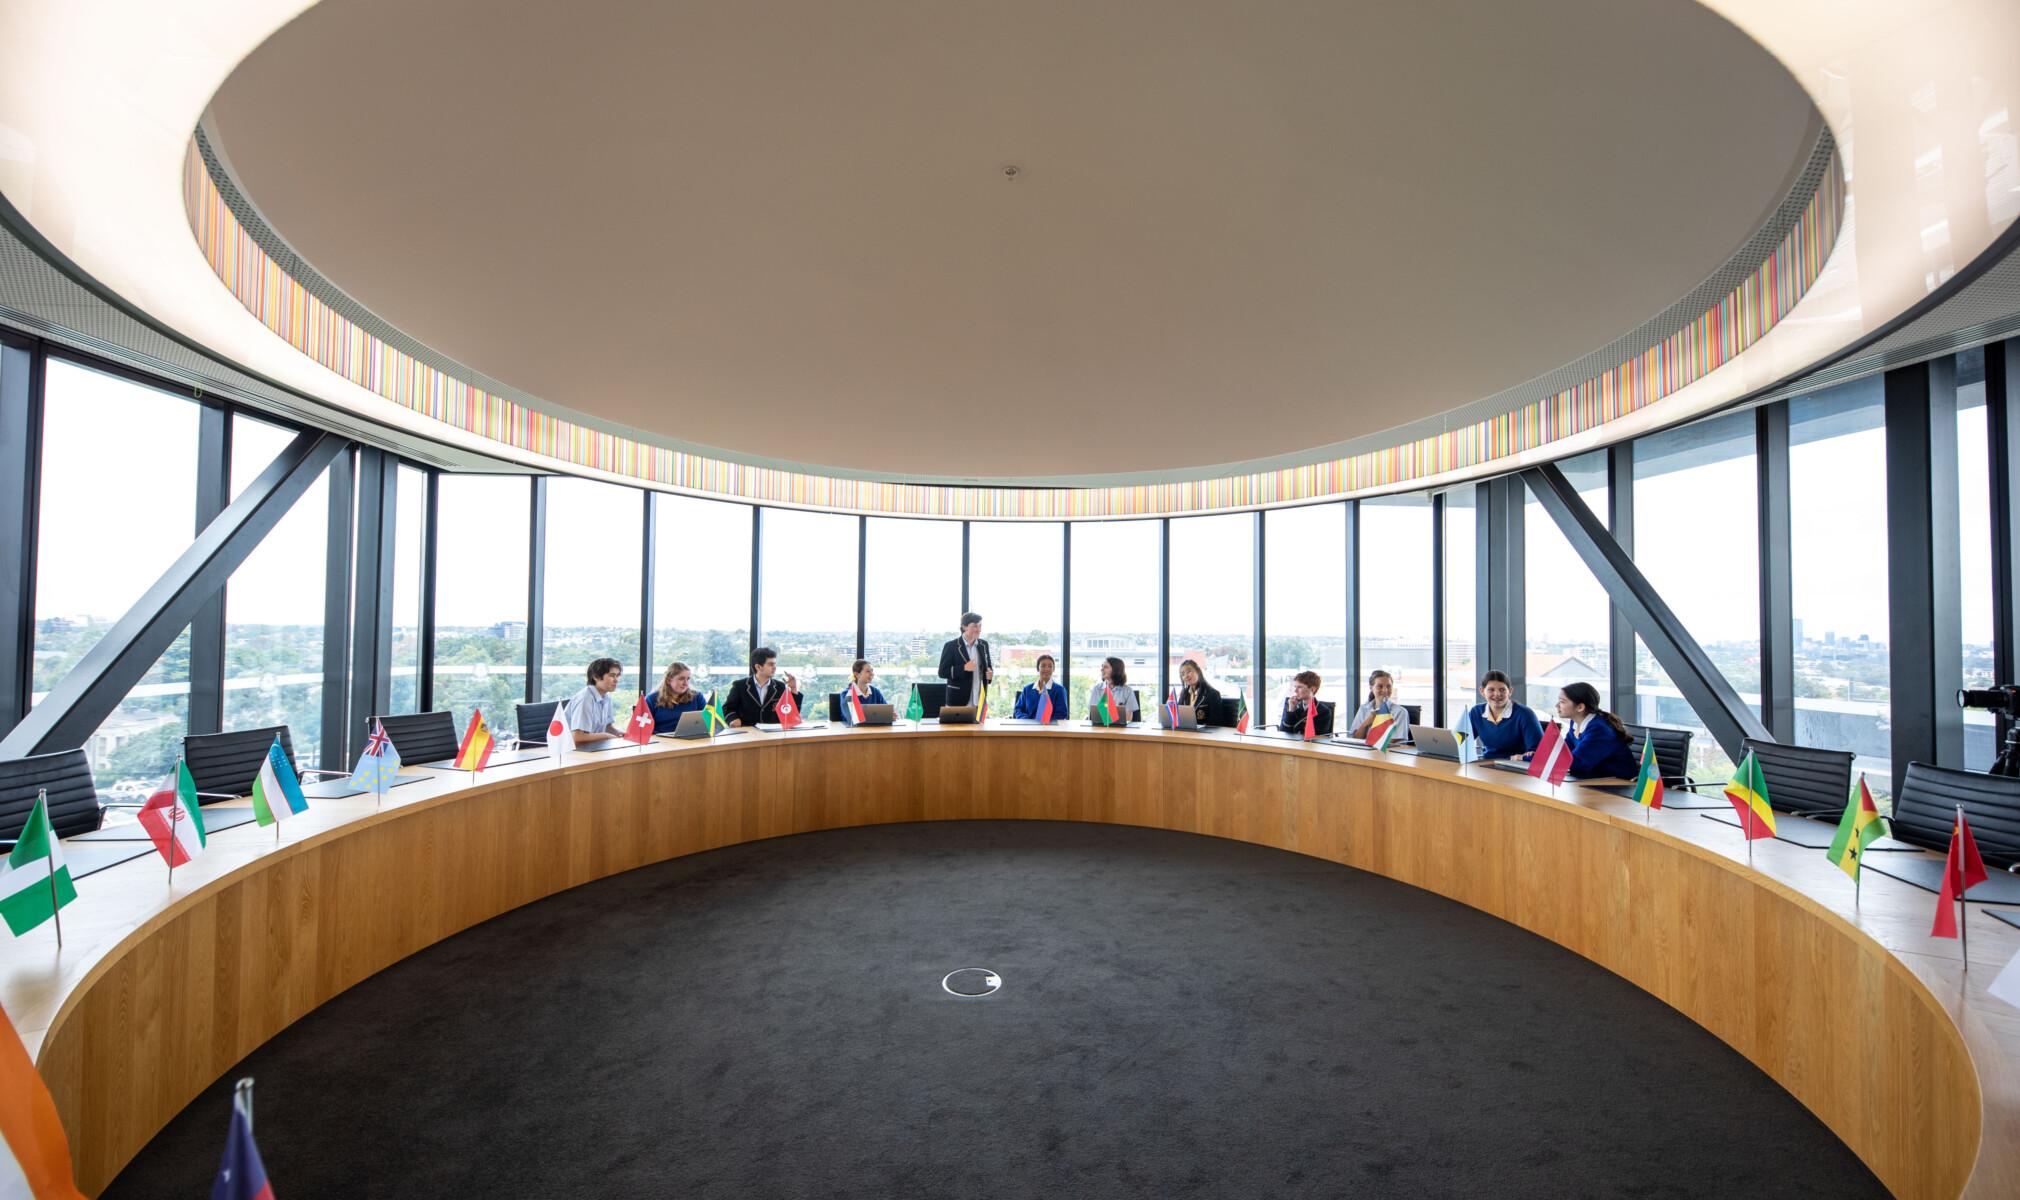 The UN Room is a space for collaborative discussion and debate.